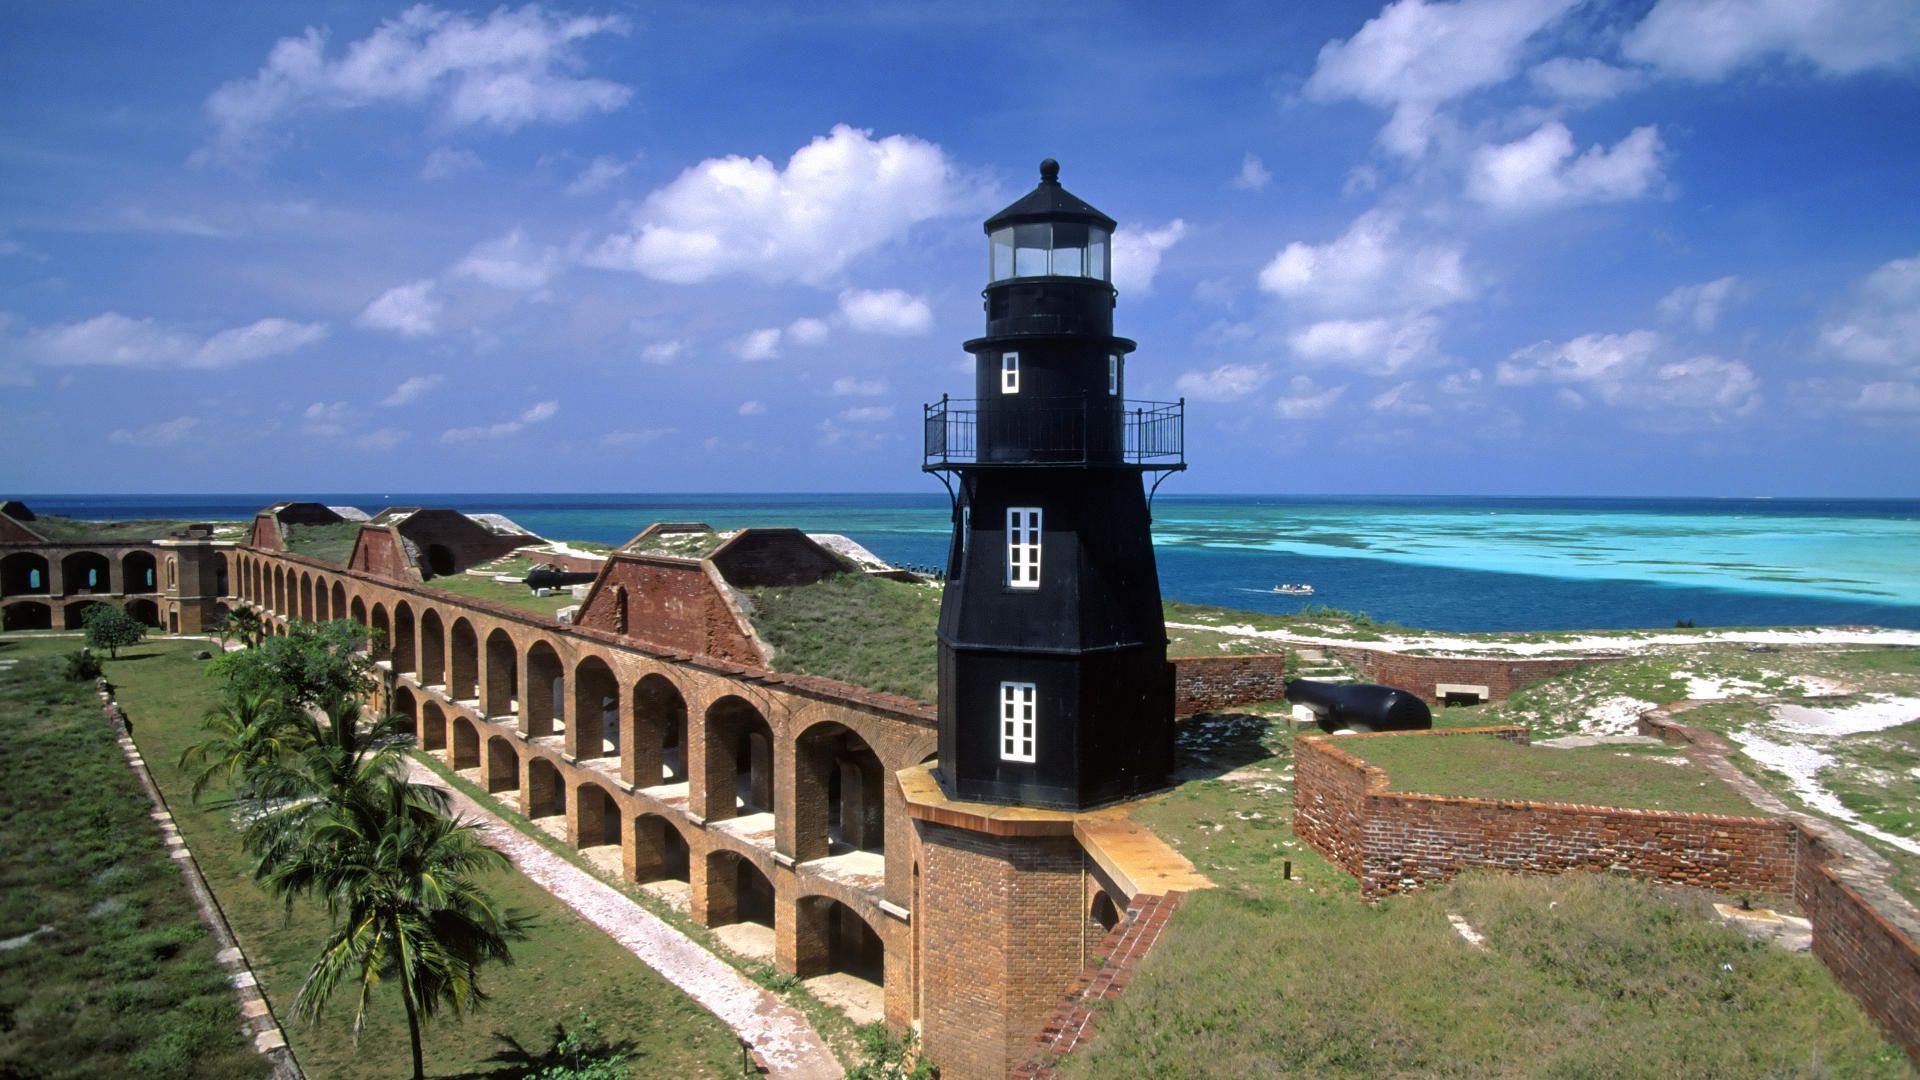 Download Background Jefferson, Dry Tortugas National Park